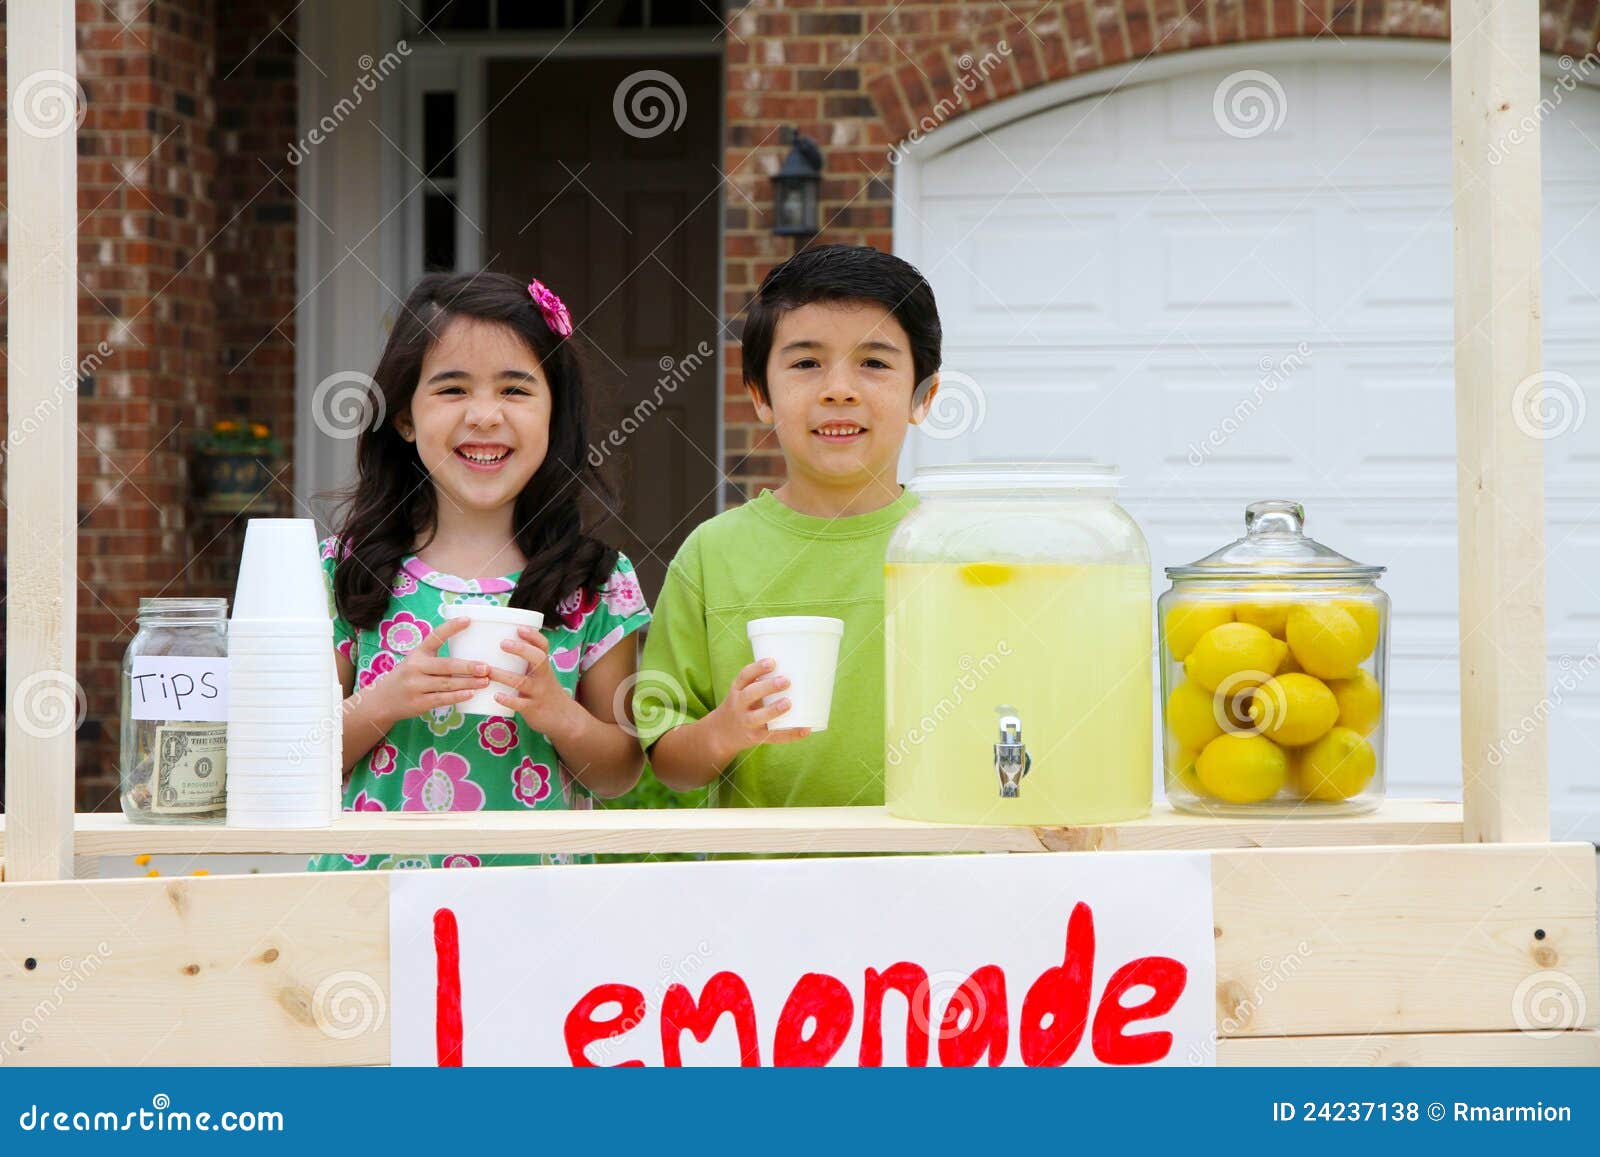 Today's kids start lemonade stands with a business plan